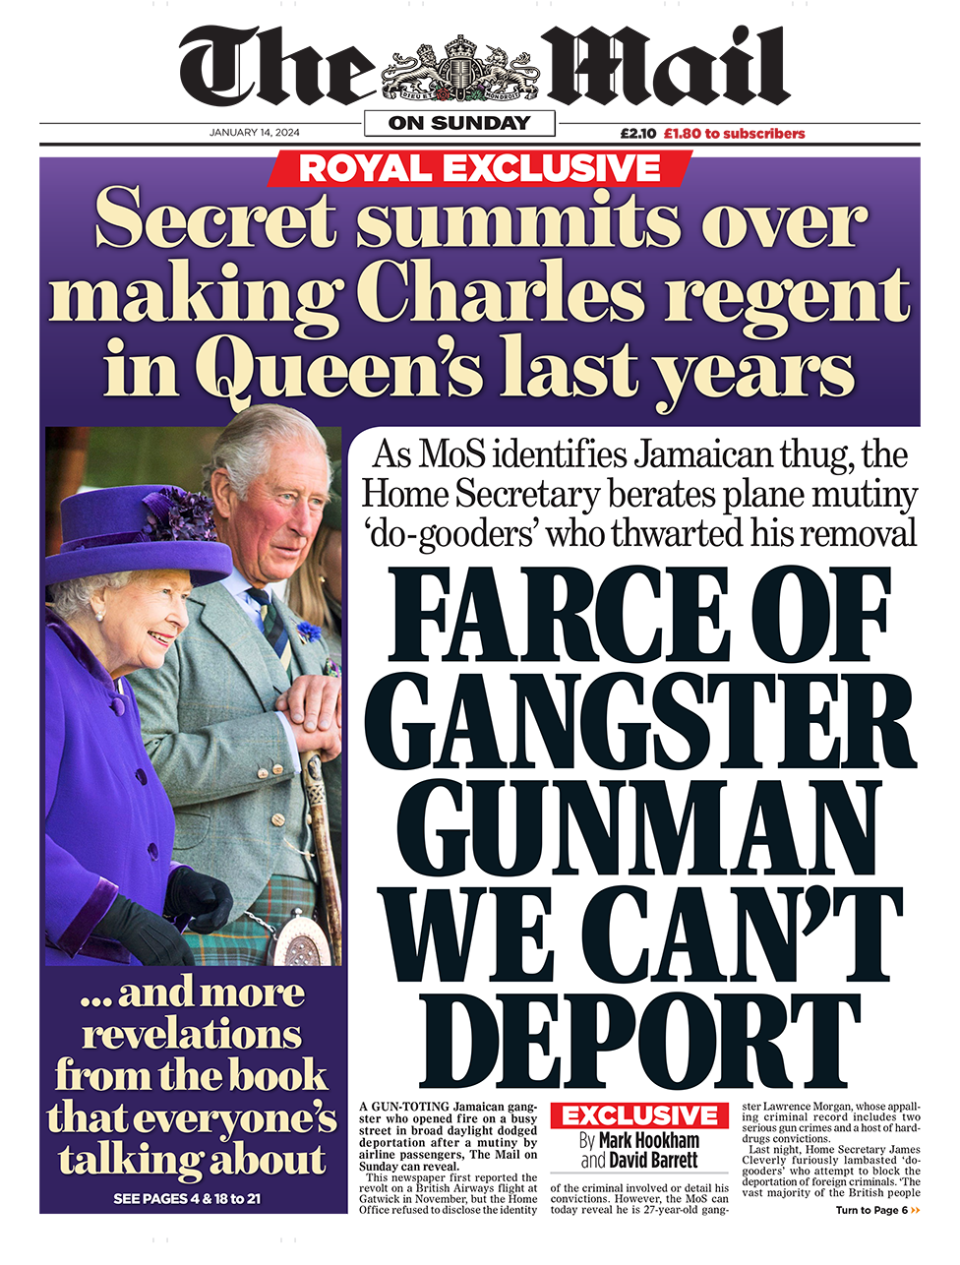 The headline on the front page of the Mail on Sunday reads: "Farce of gangster gunman we can't deport"